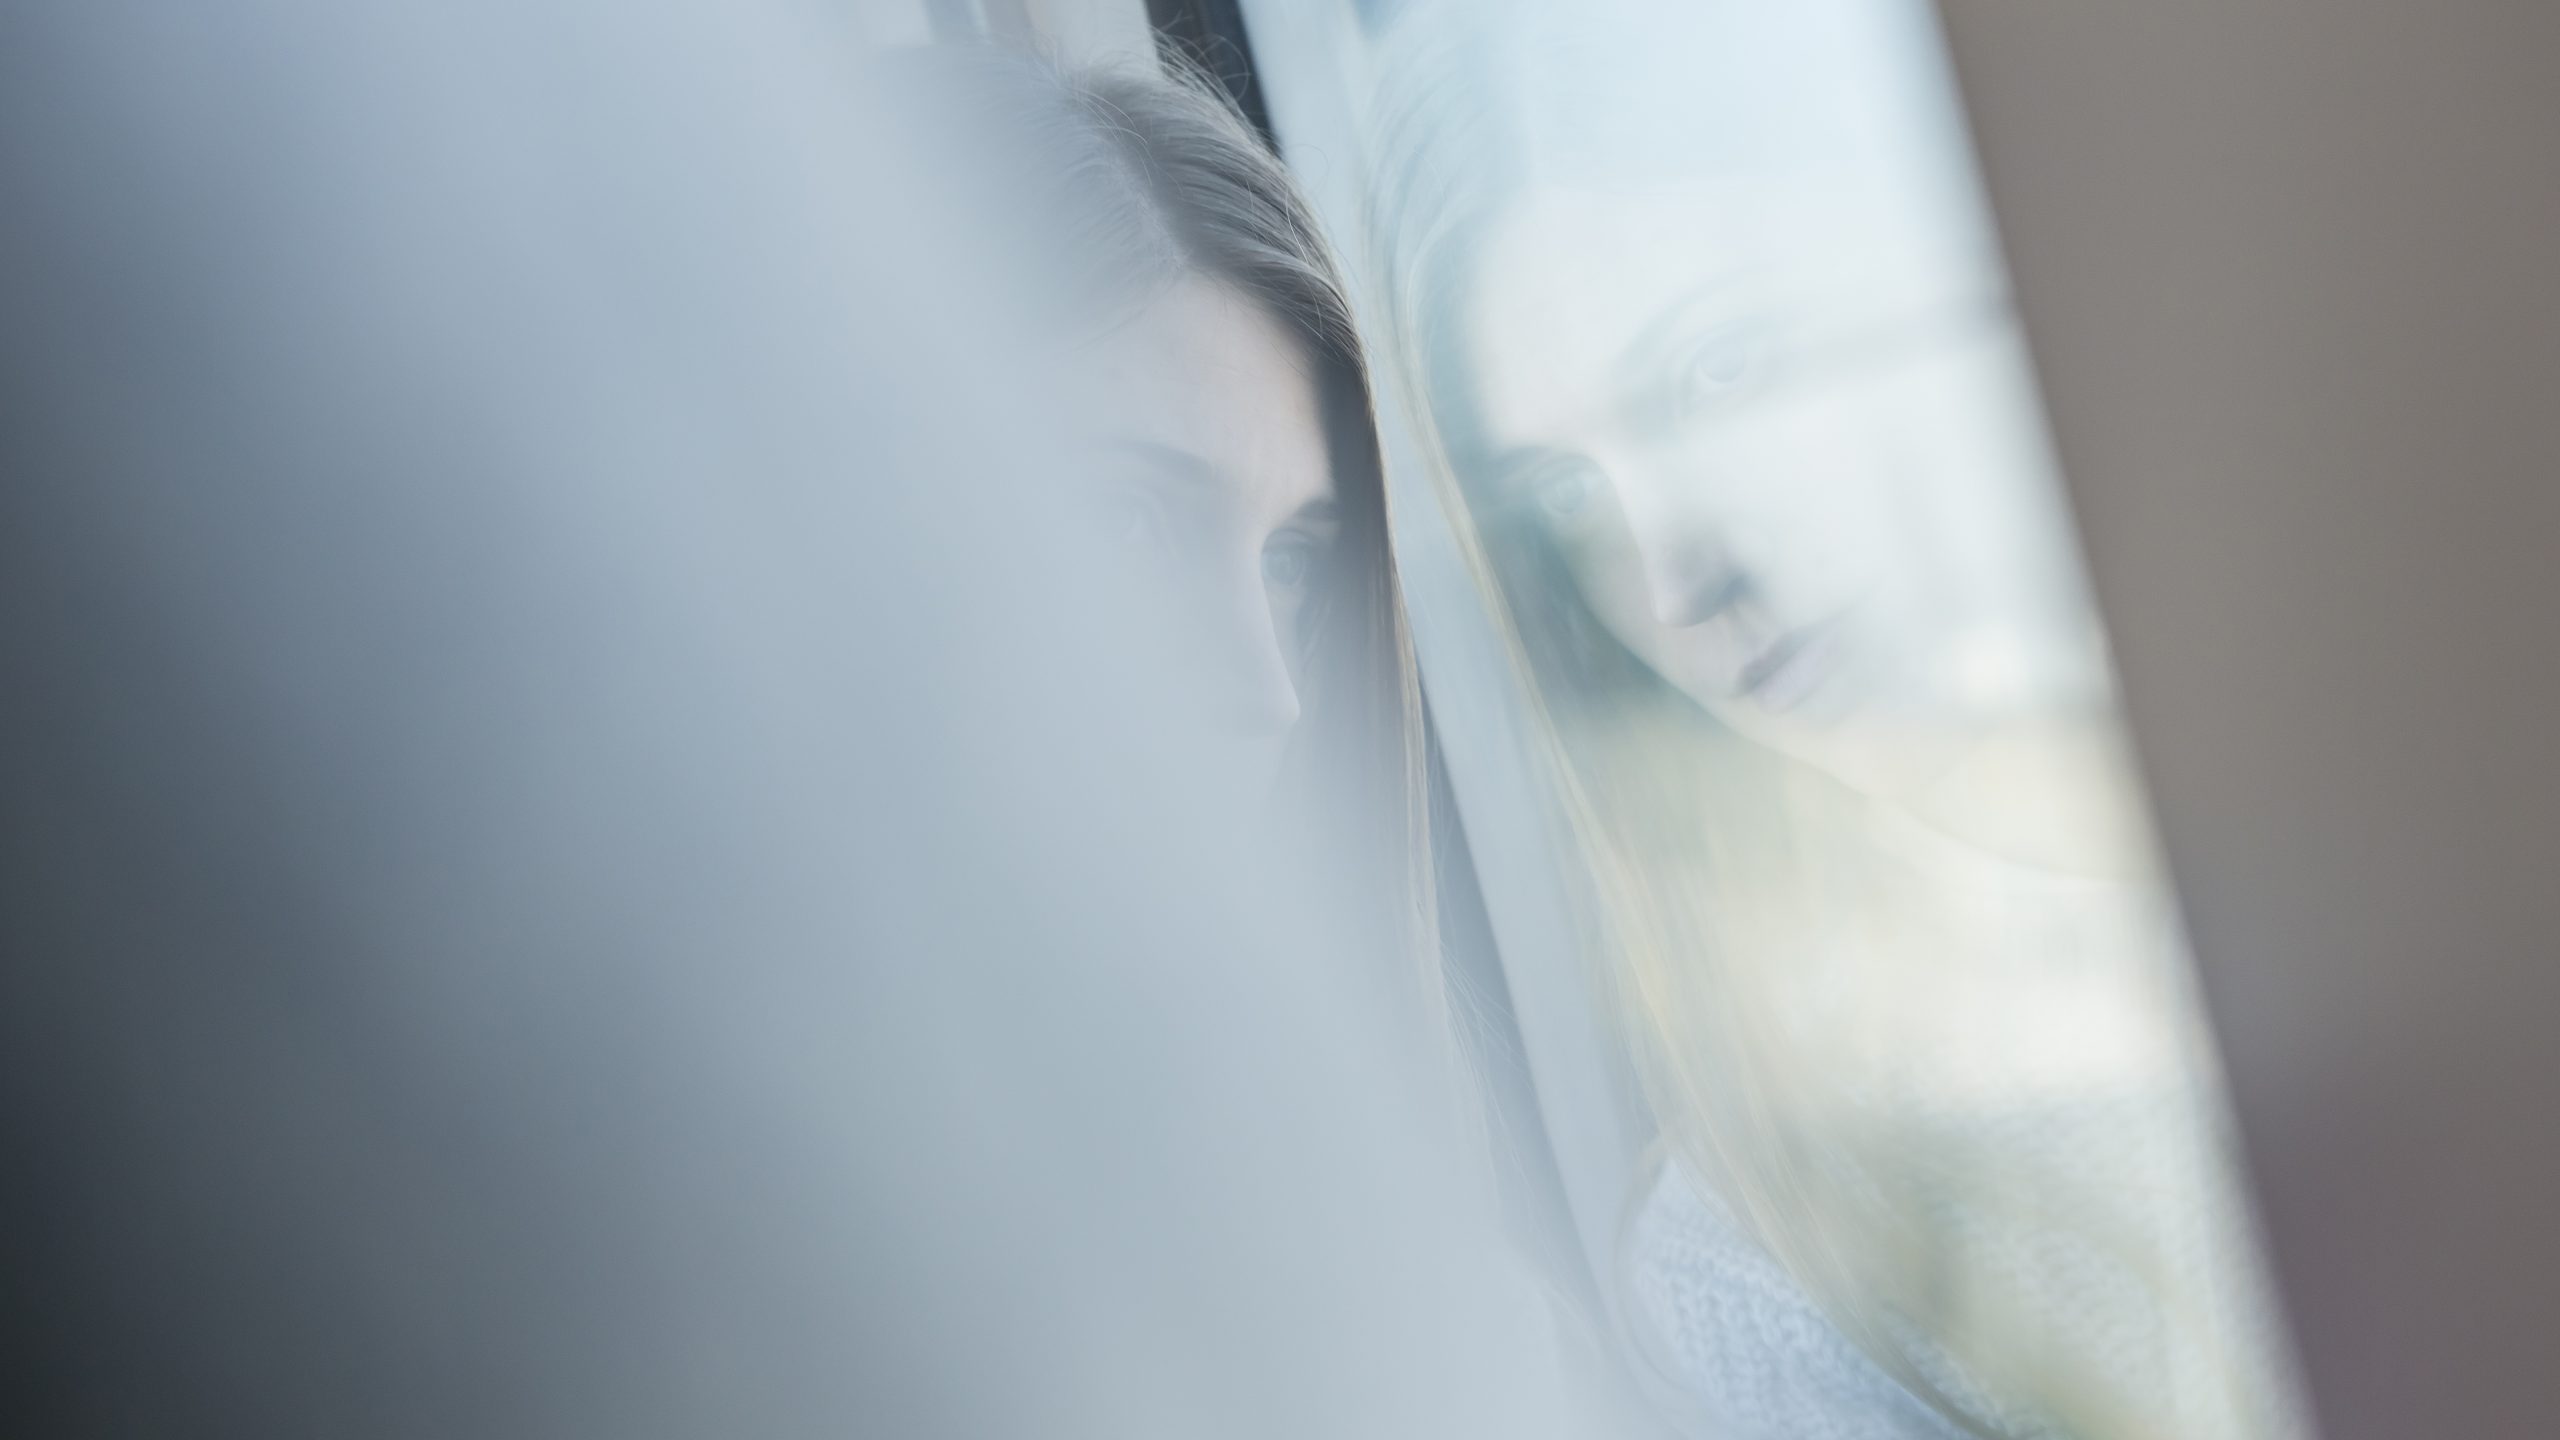 Decorative photograph of a young woman looking out of the window in Hong Kong MTR train - photo by photographer Tuomas Harjumaaskola, China